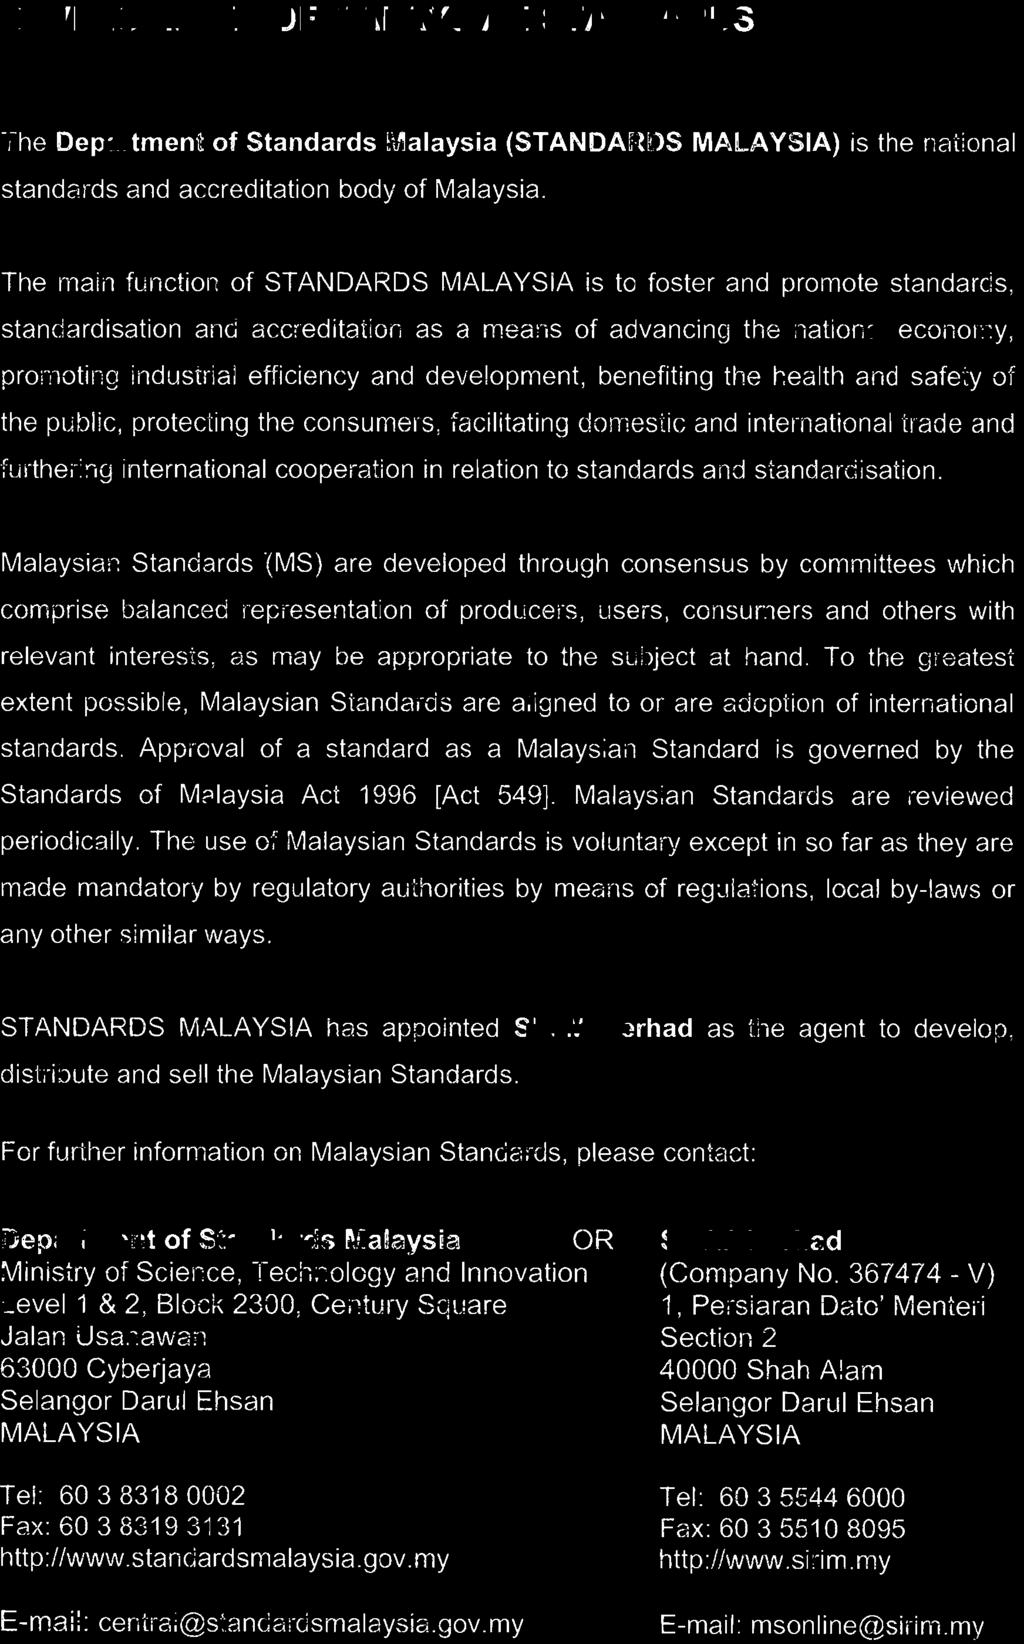 DEVELOPMENT OF MALAYSIAN STANDARDS The Department of Standards Malaysia (STANDARDS MALAYSIA) is the national standards and accreditation body of Malaysia.